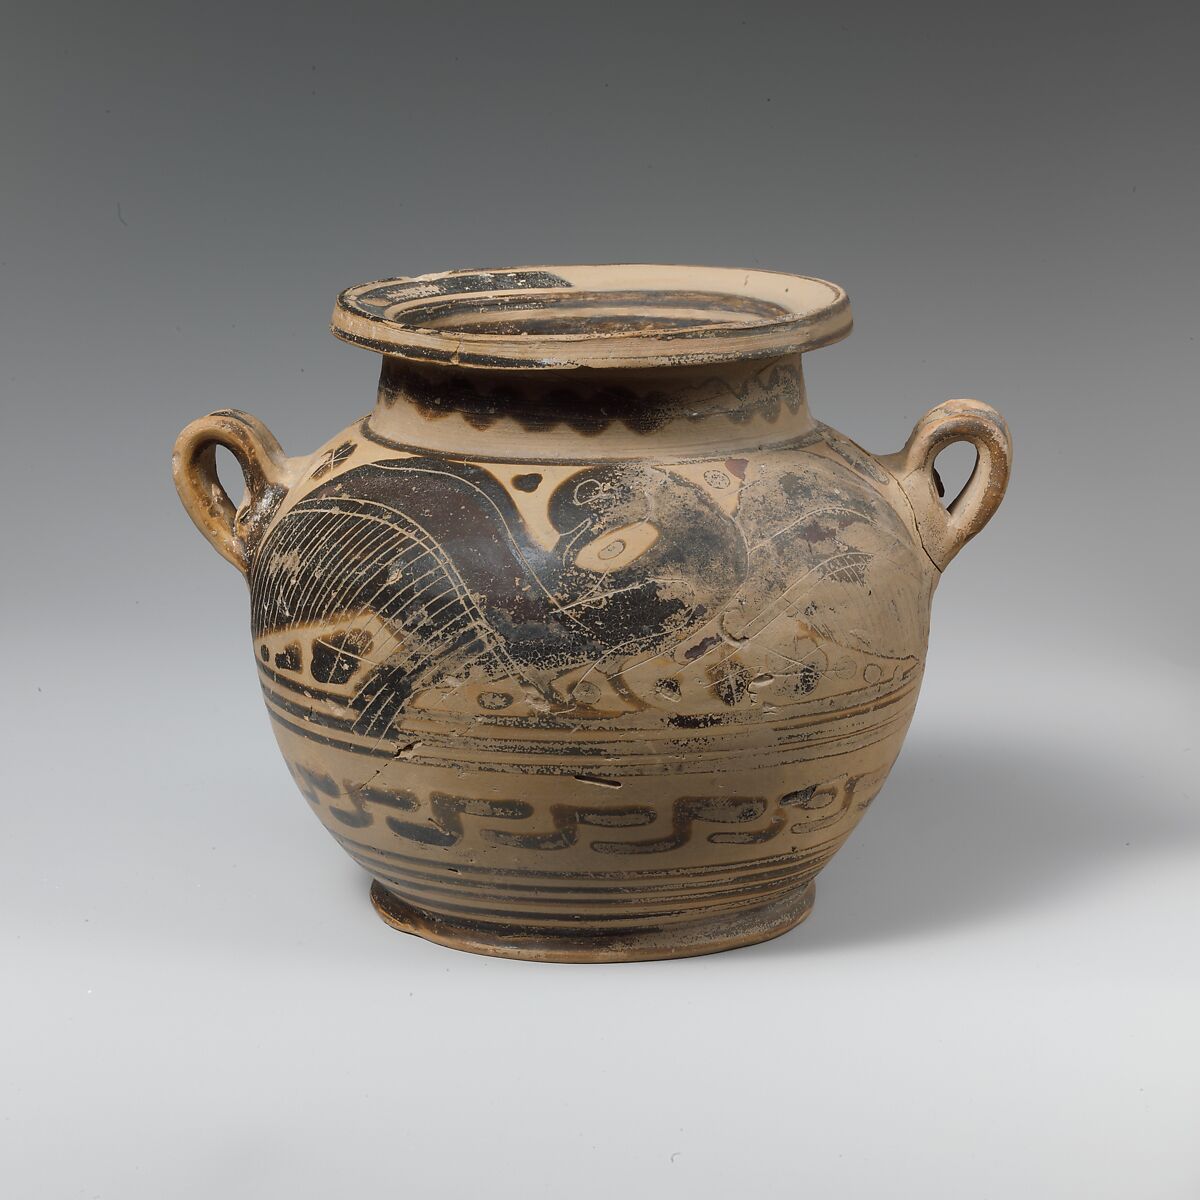 Terracotta pyxis (box), Apparently by the Hermitage Painter, Terracotta, Greek, Corinthian 